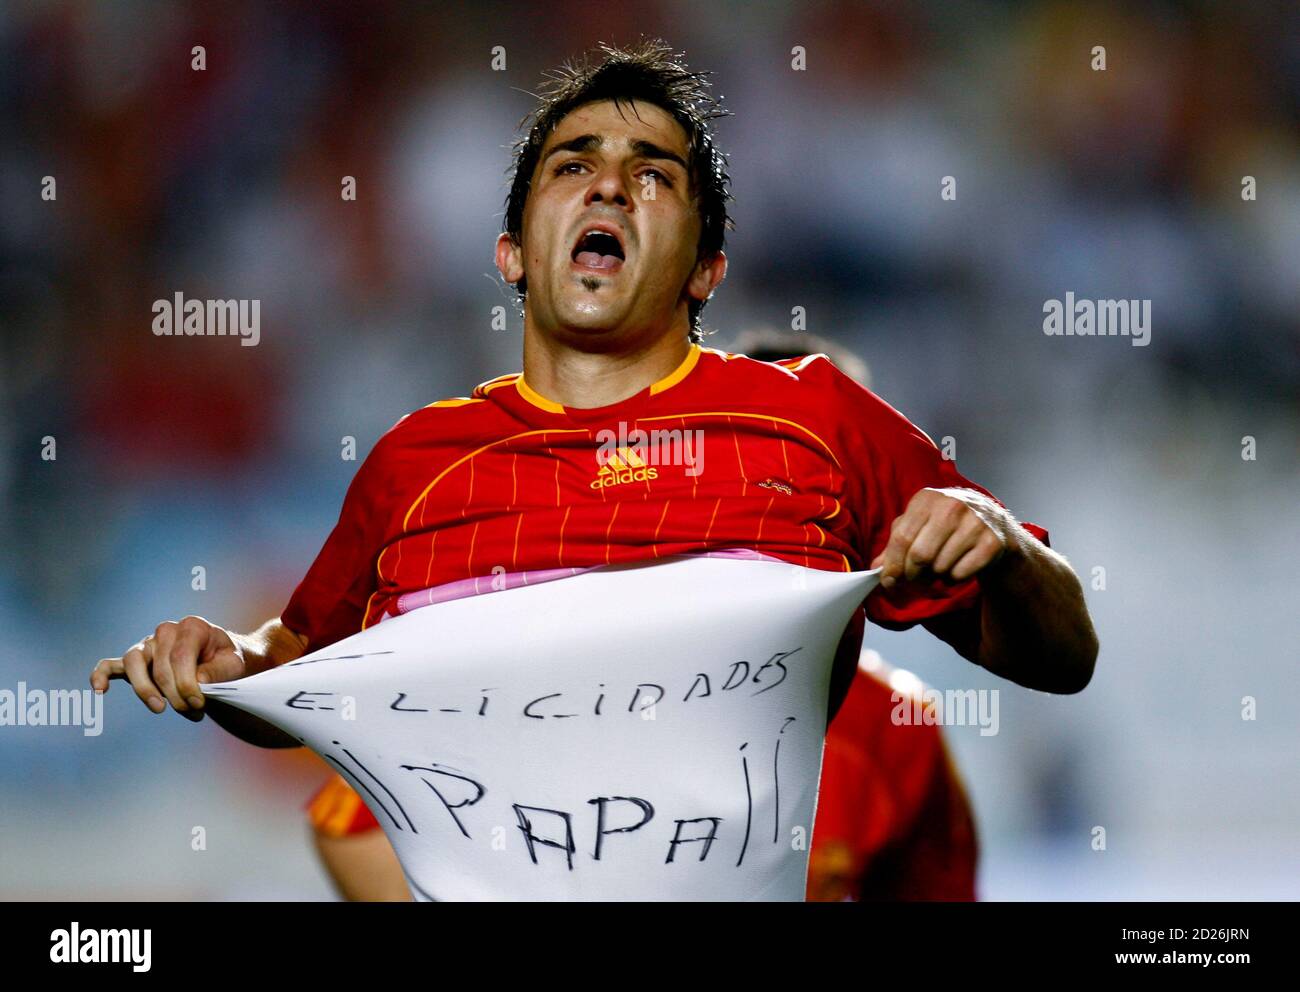 Spain's David Villa celebrates after scoring from the penalty spot against  Argentina during their international friendly soccer match at Nueva  Condomina stadium in Murcia, Spain October 11, 2006. REUTERS/Sergio Perez  (SPAIN Stock